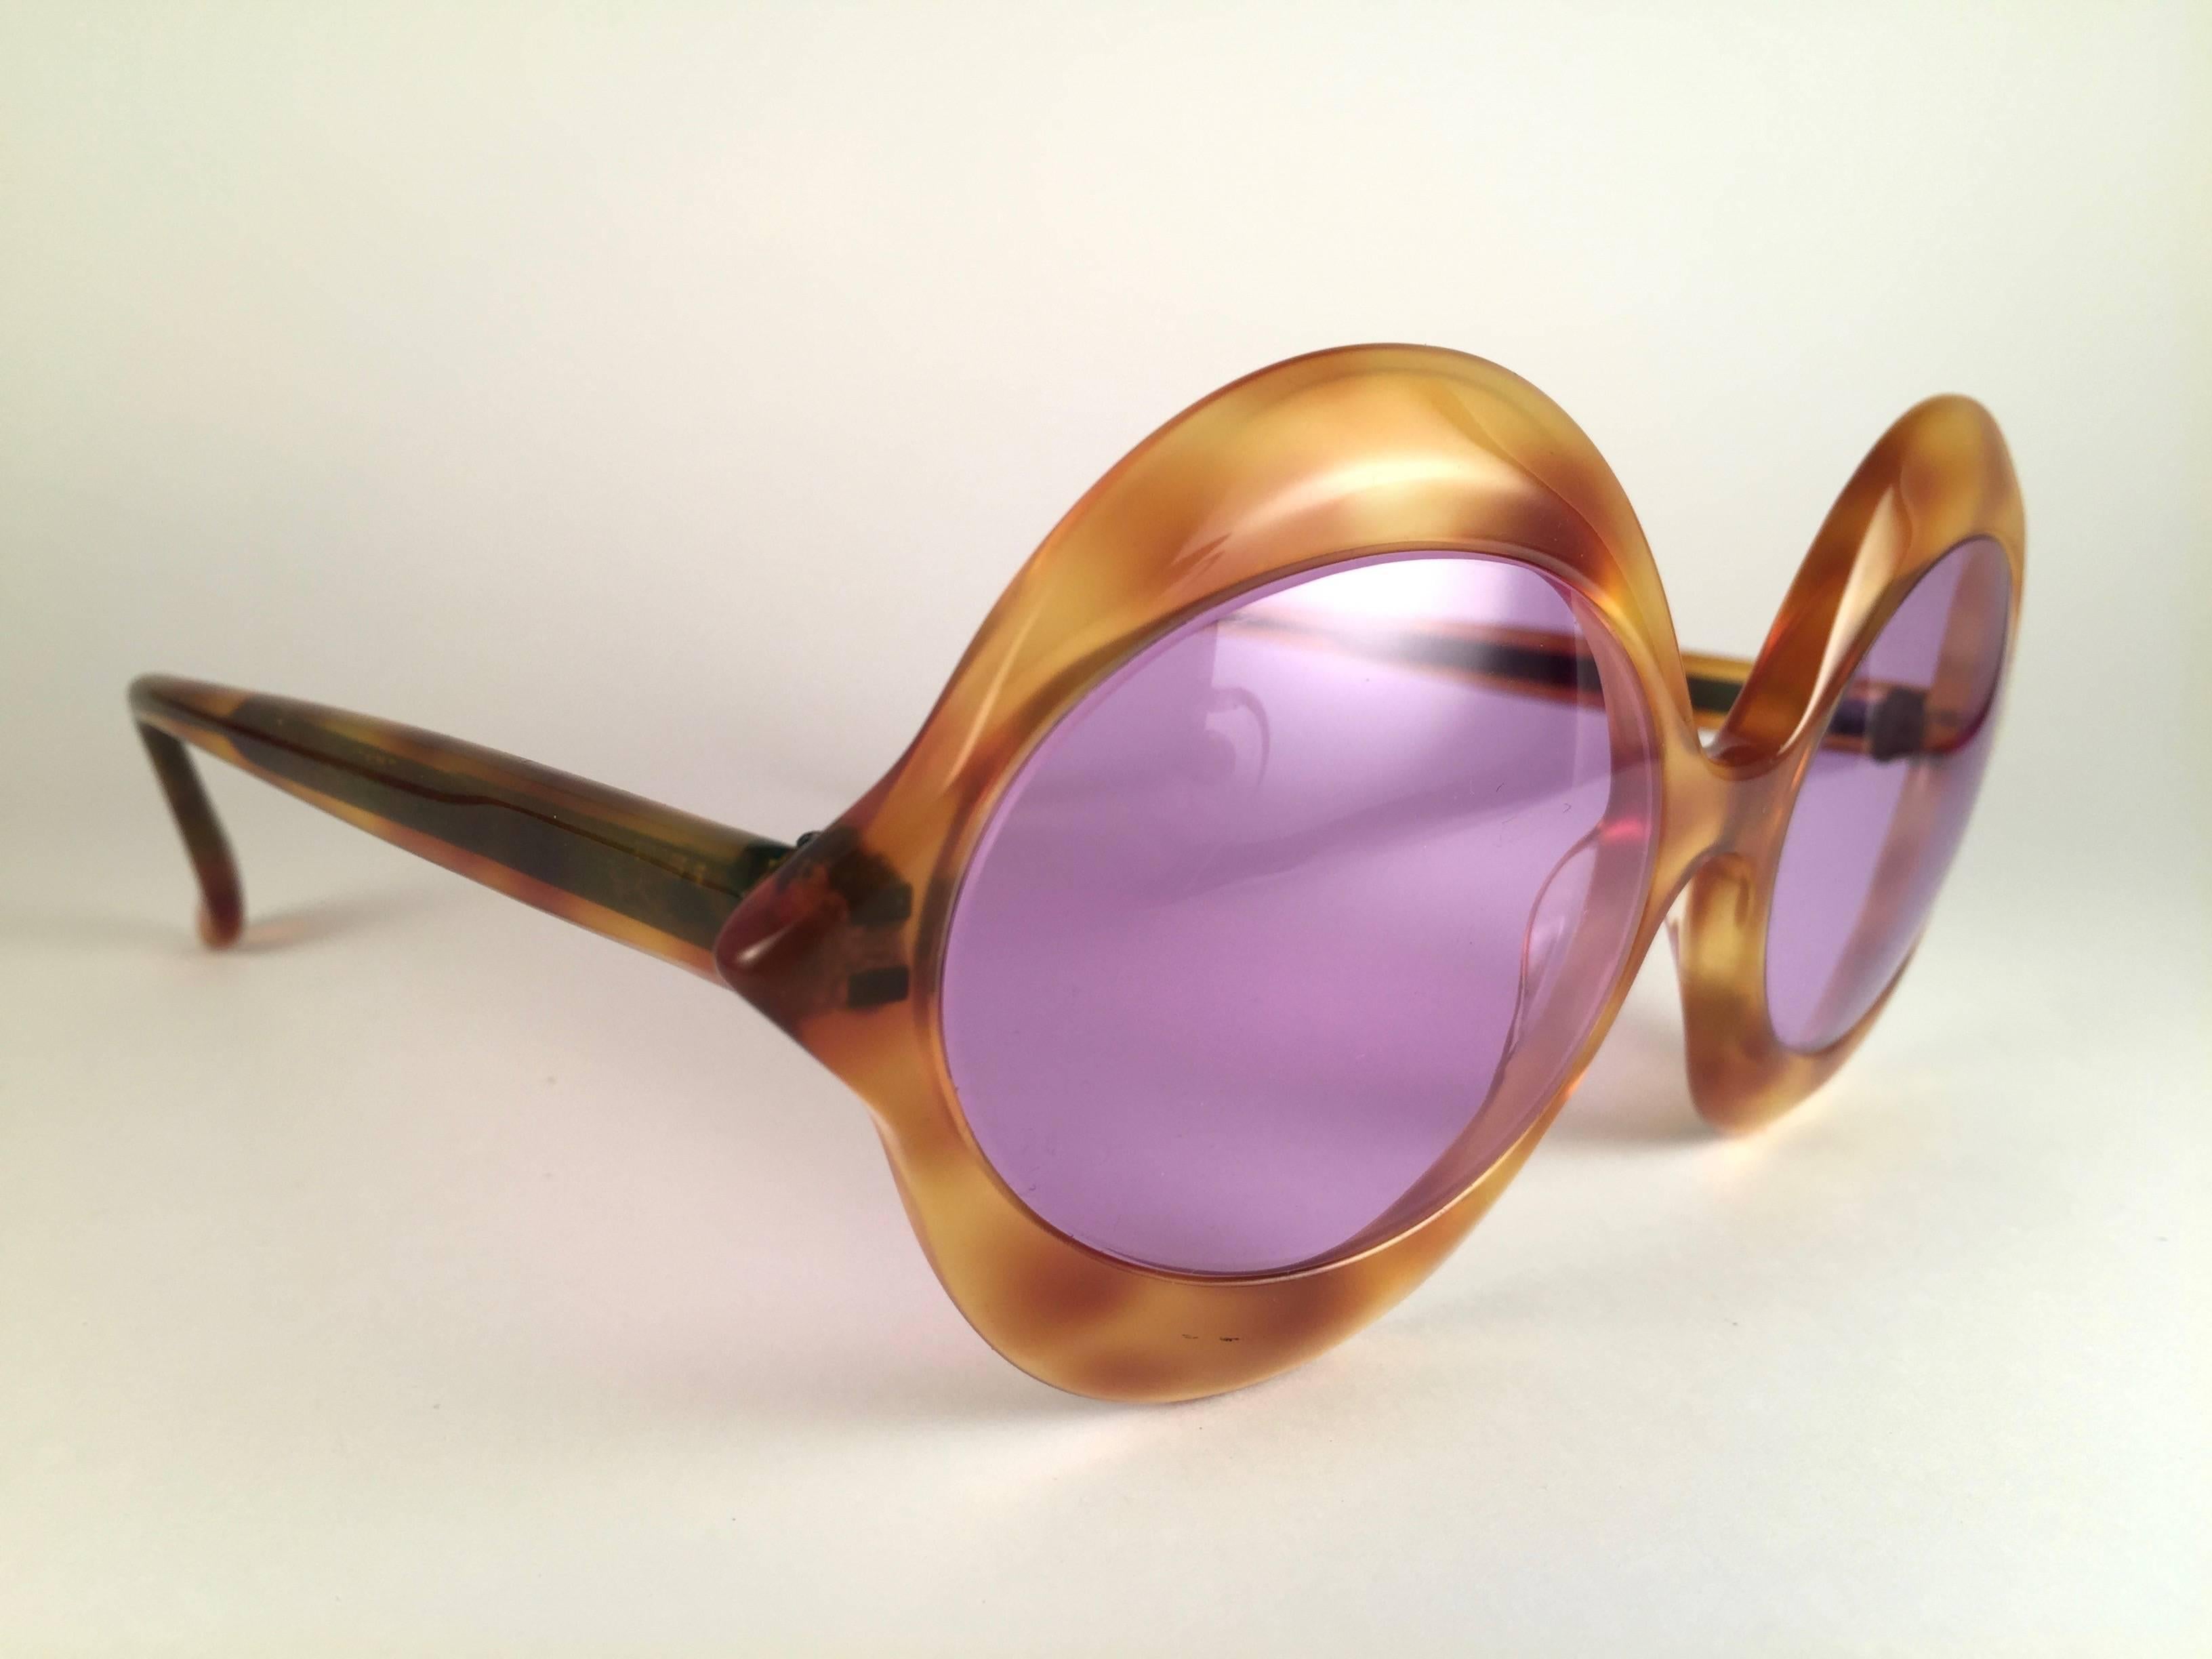 Vintage new Pierre Cardin lips c18 52/18 in light tortoise with spotless rose lenses Medium size 1960’s . Ultra rare design emulating a sleek and provocative pair of lips.  

New, never used or displayed this pair of vintage pierre cardin is a rare